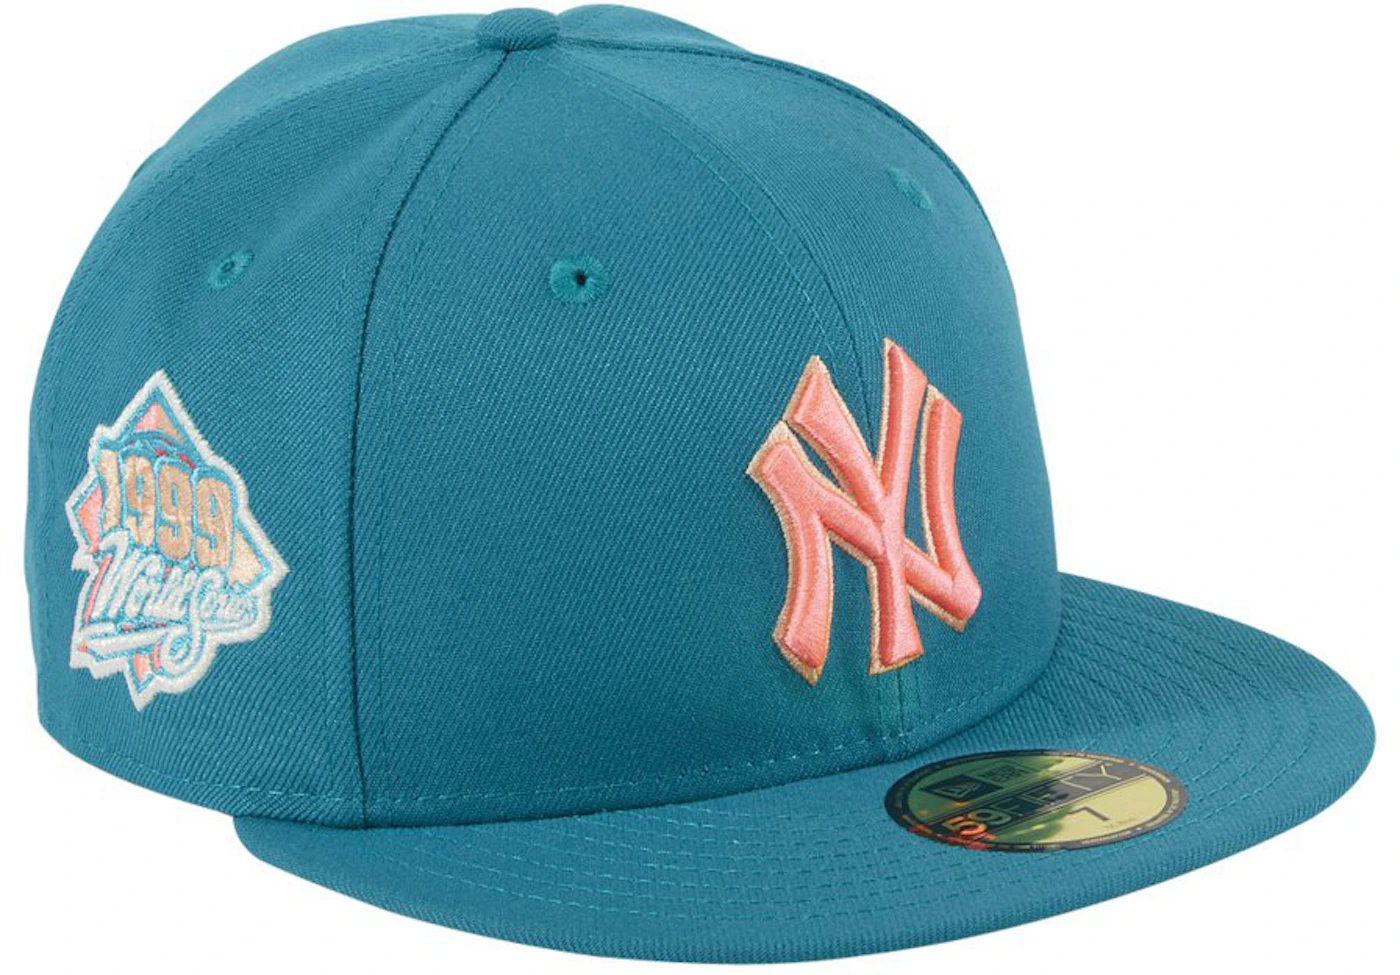 New Era 59FIFTY New York Yankees 1999 World Series Patch Hat - Navy Game / 7 7/8